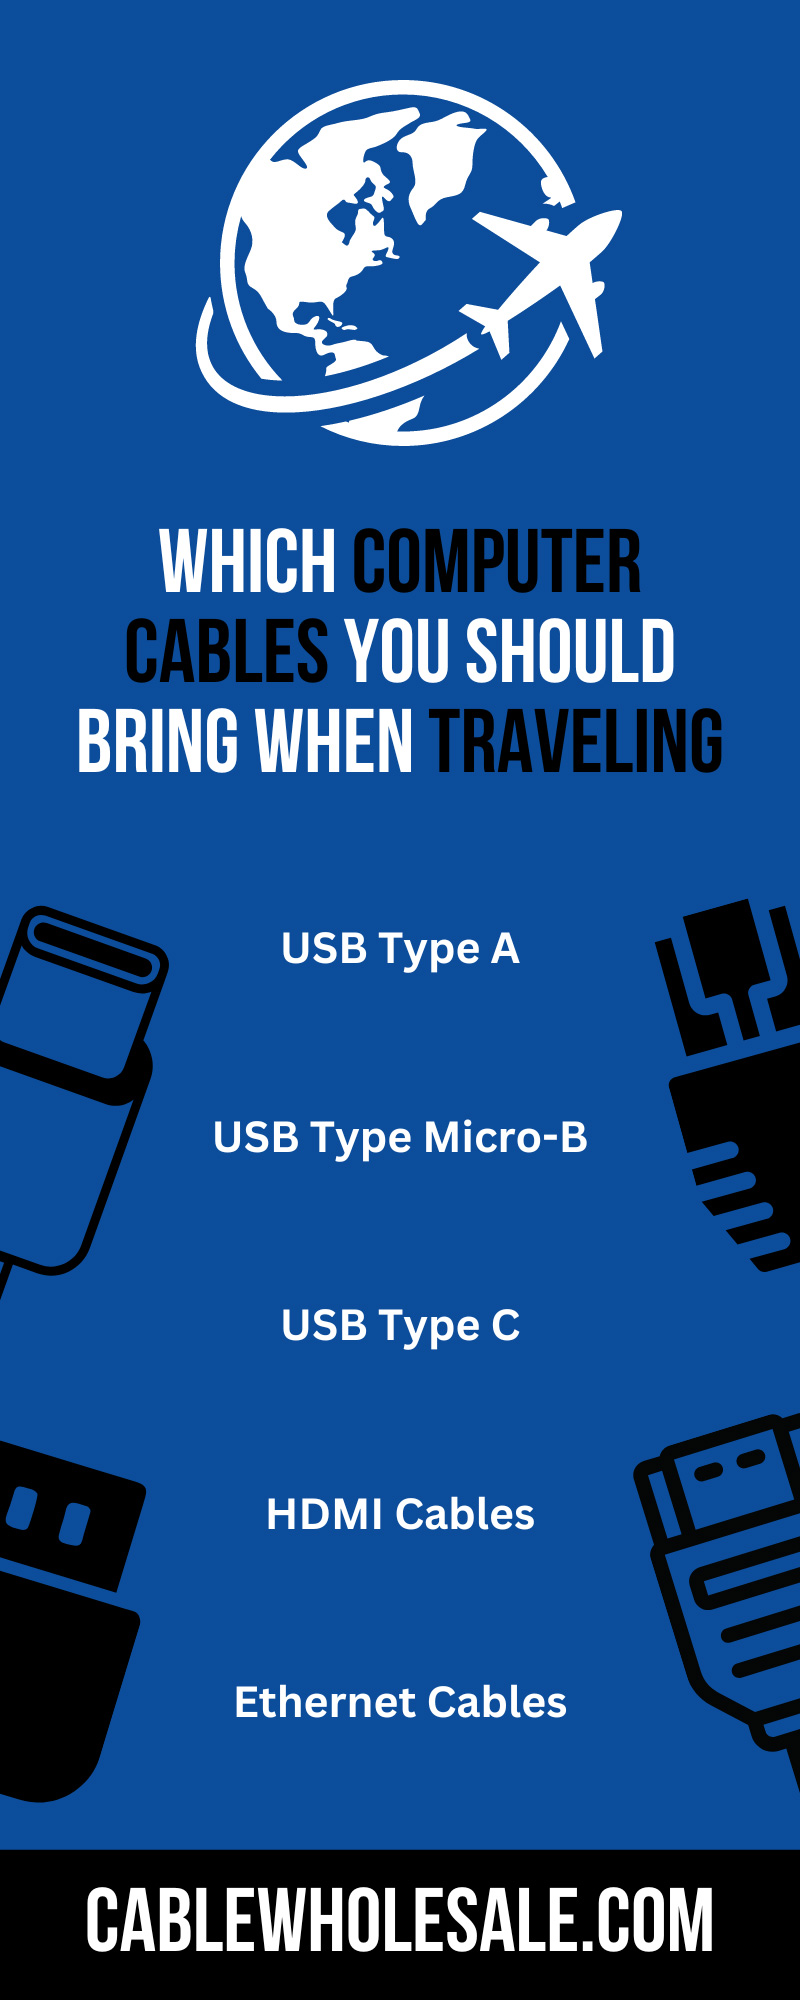 Which Computer Cables You Should Bring When Traveling
